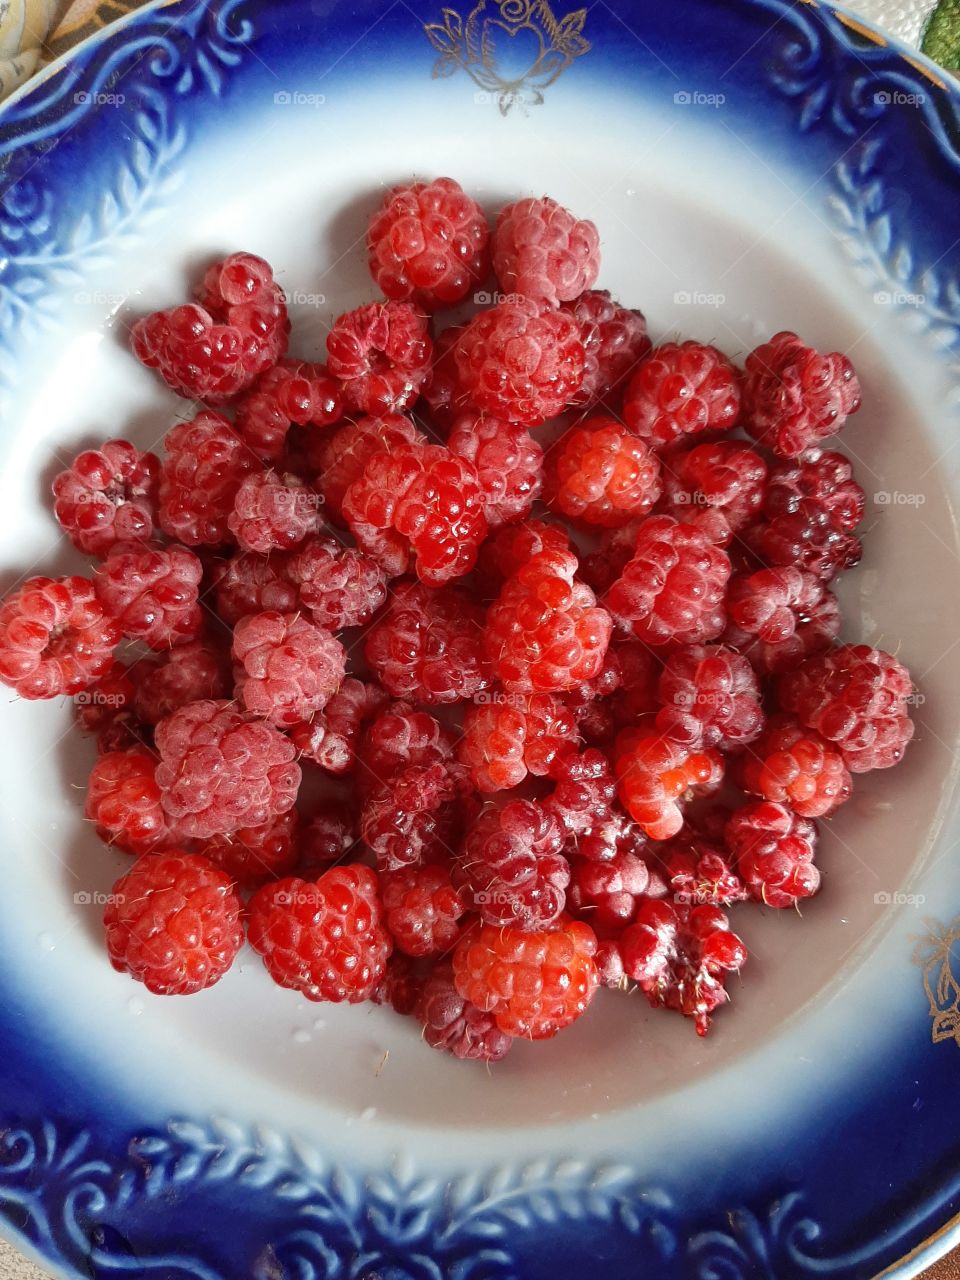 Raspberry berry on a plate with a blue border